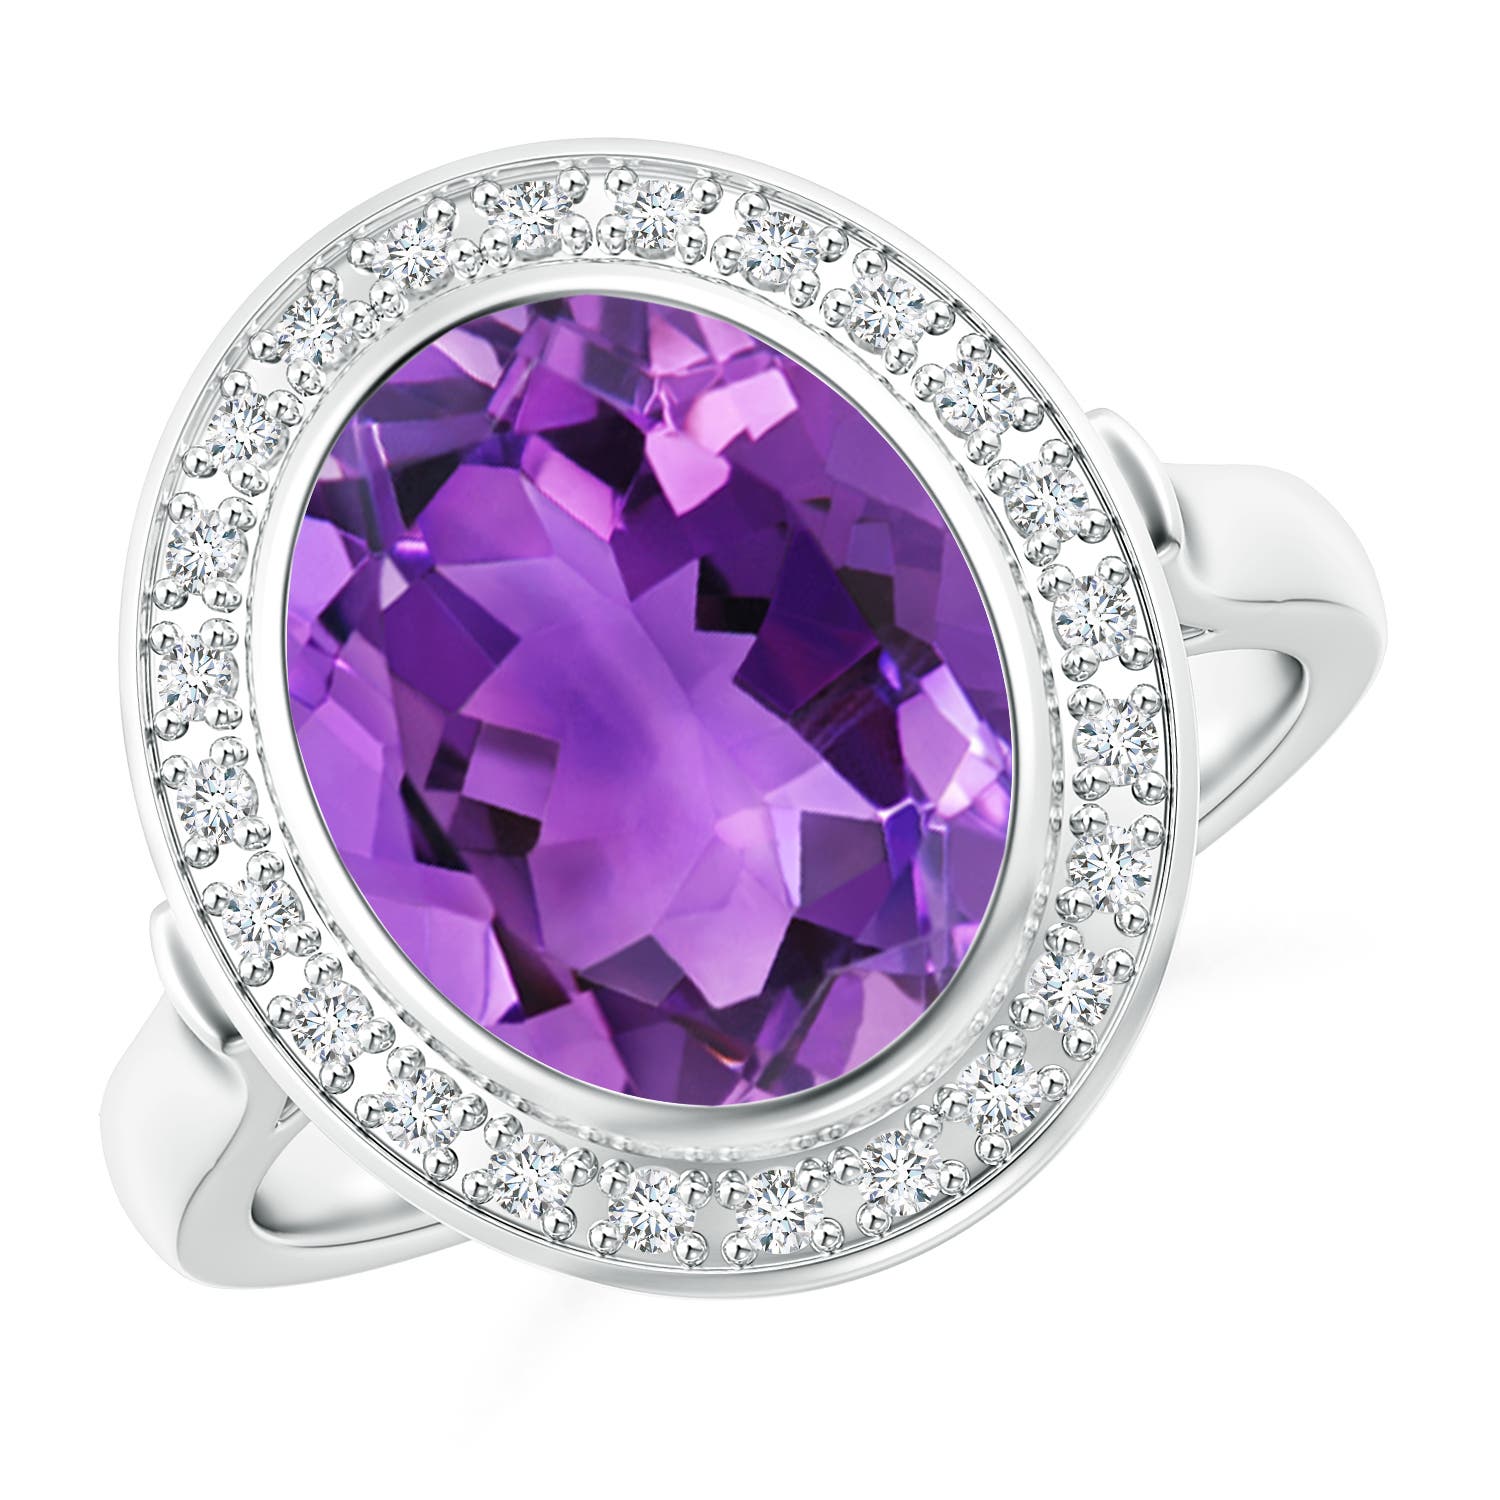 AAA - Amethyst / 3.34 CT / 14 KT White Gold